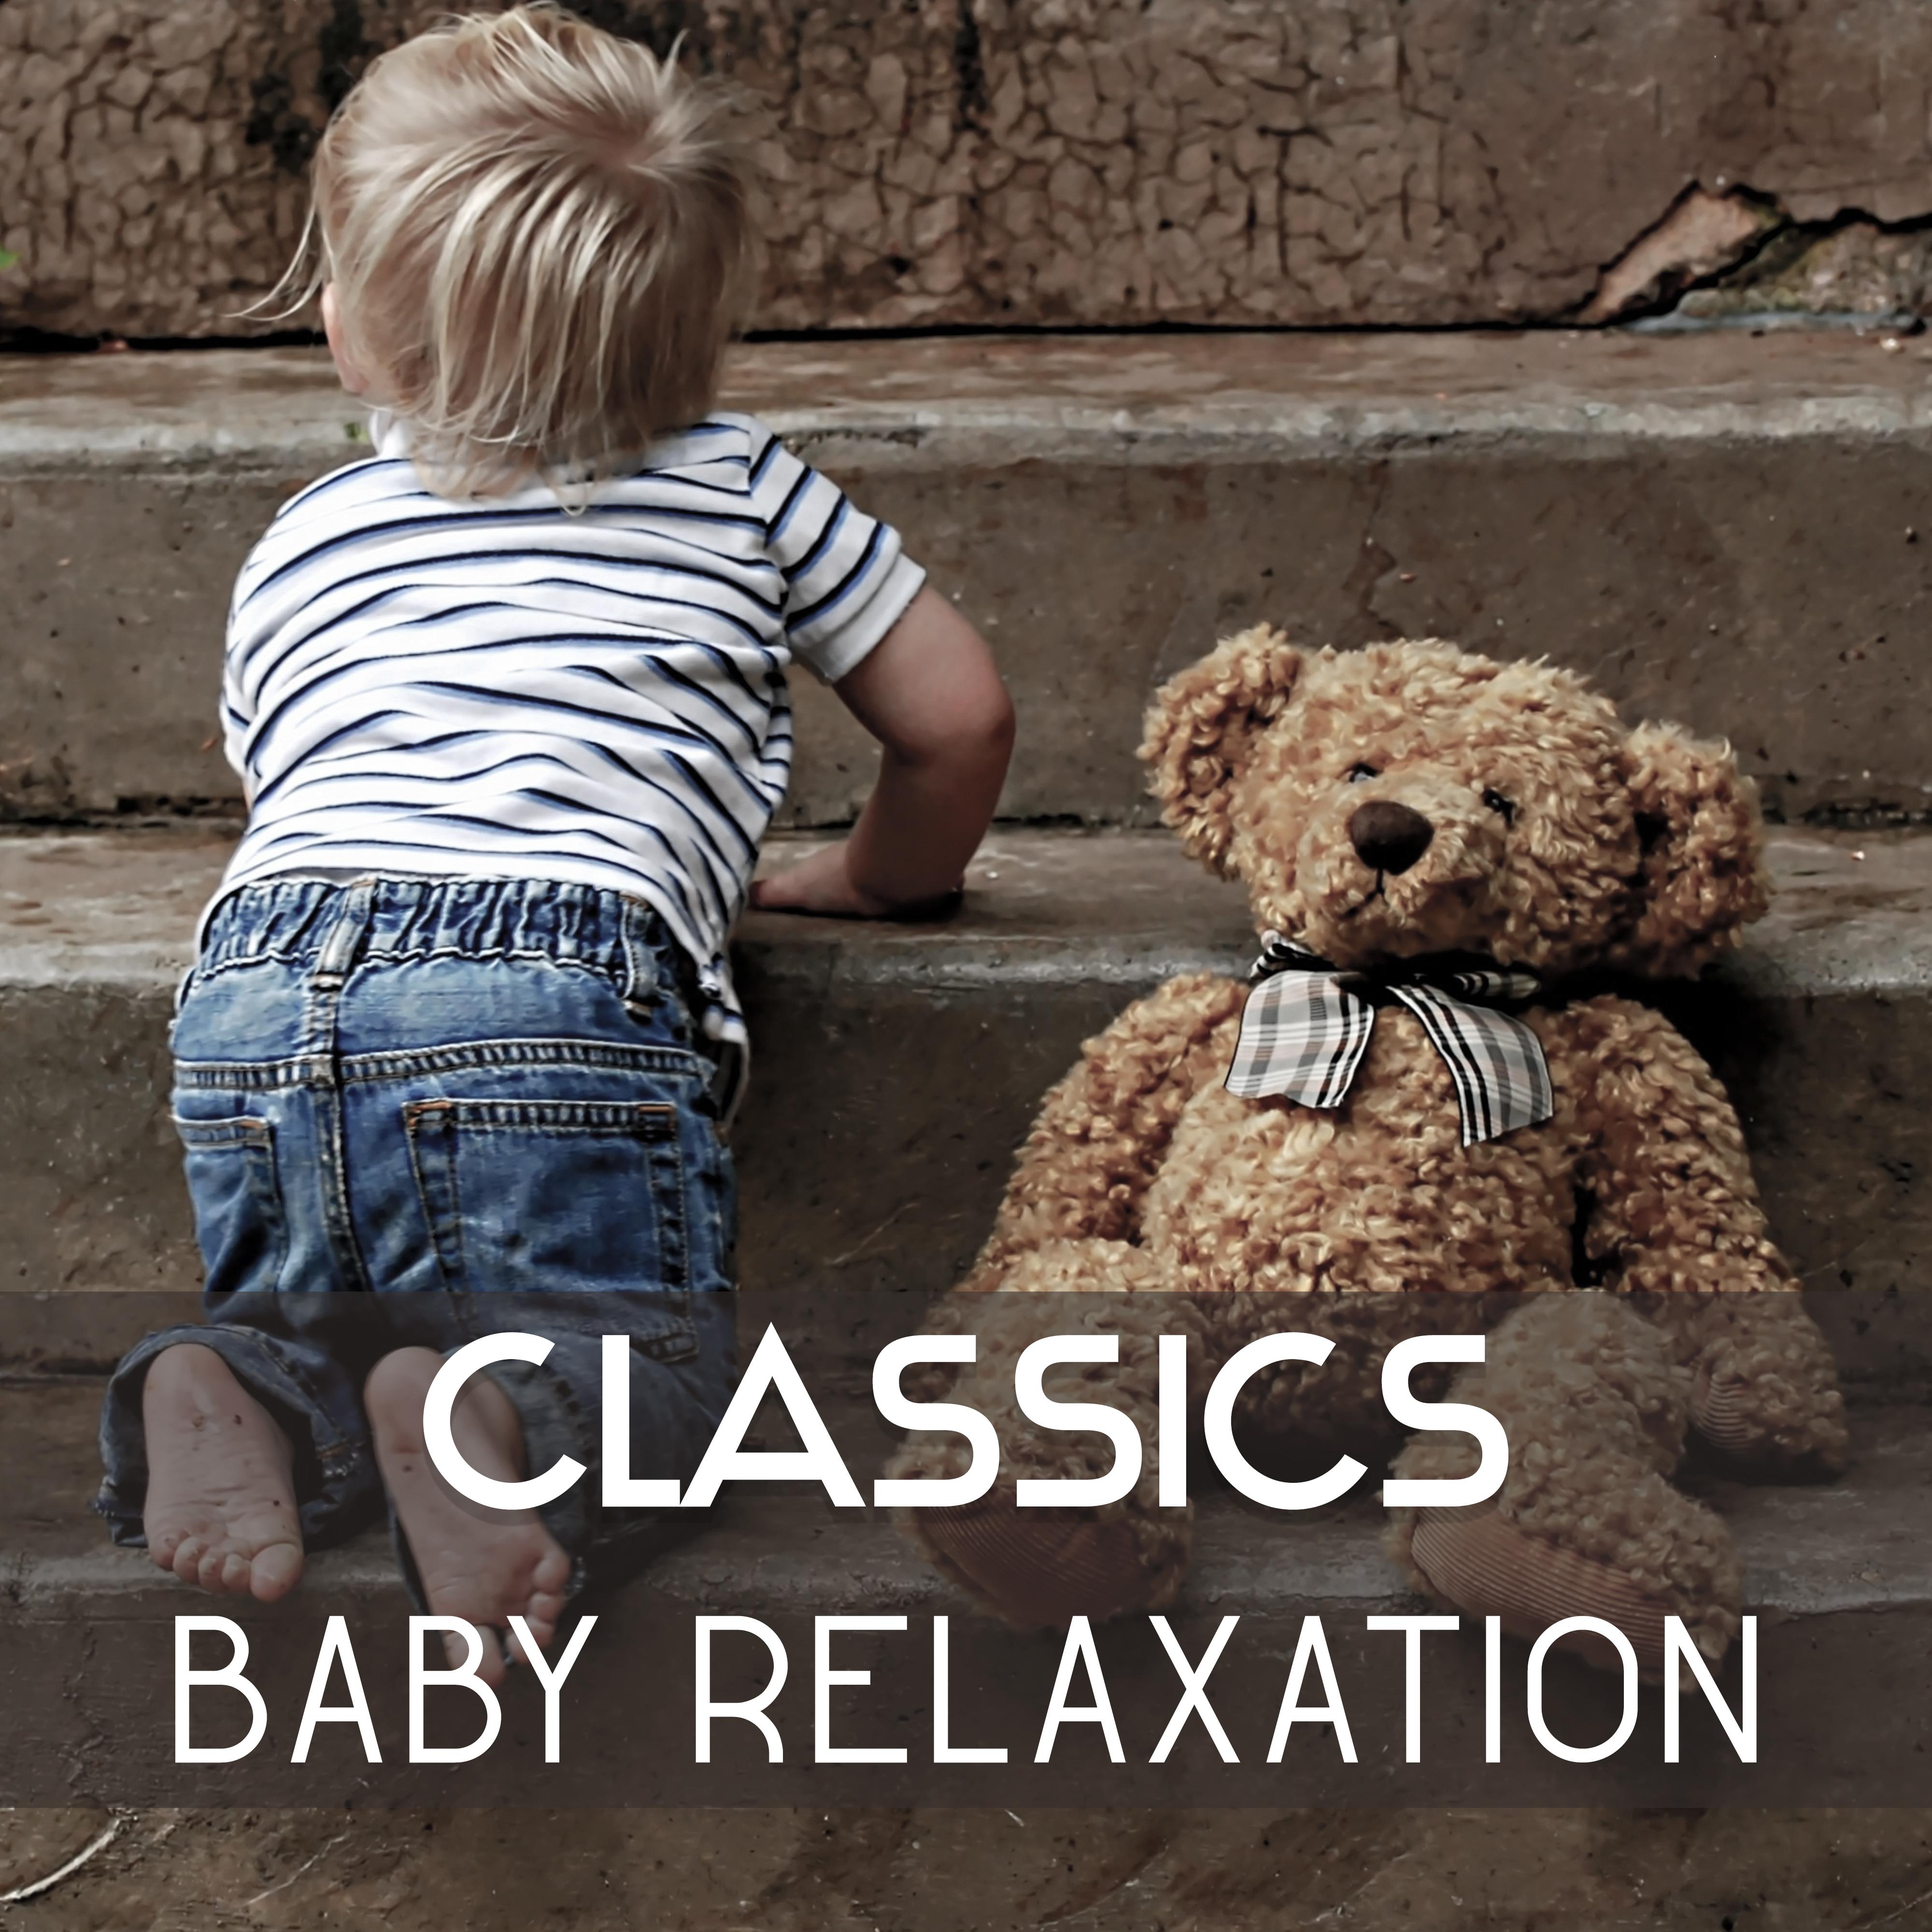 Classics Baby Relaxation – Soft Music for Baby, Classical Sounds to Calm Baby, Baby Sleep